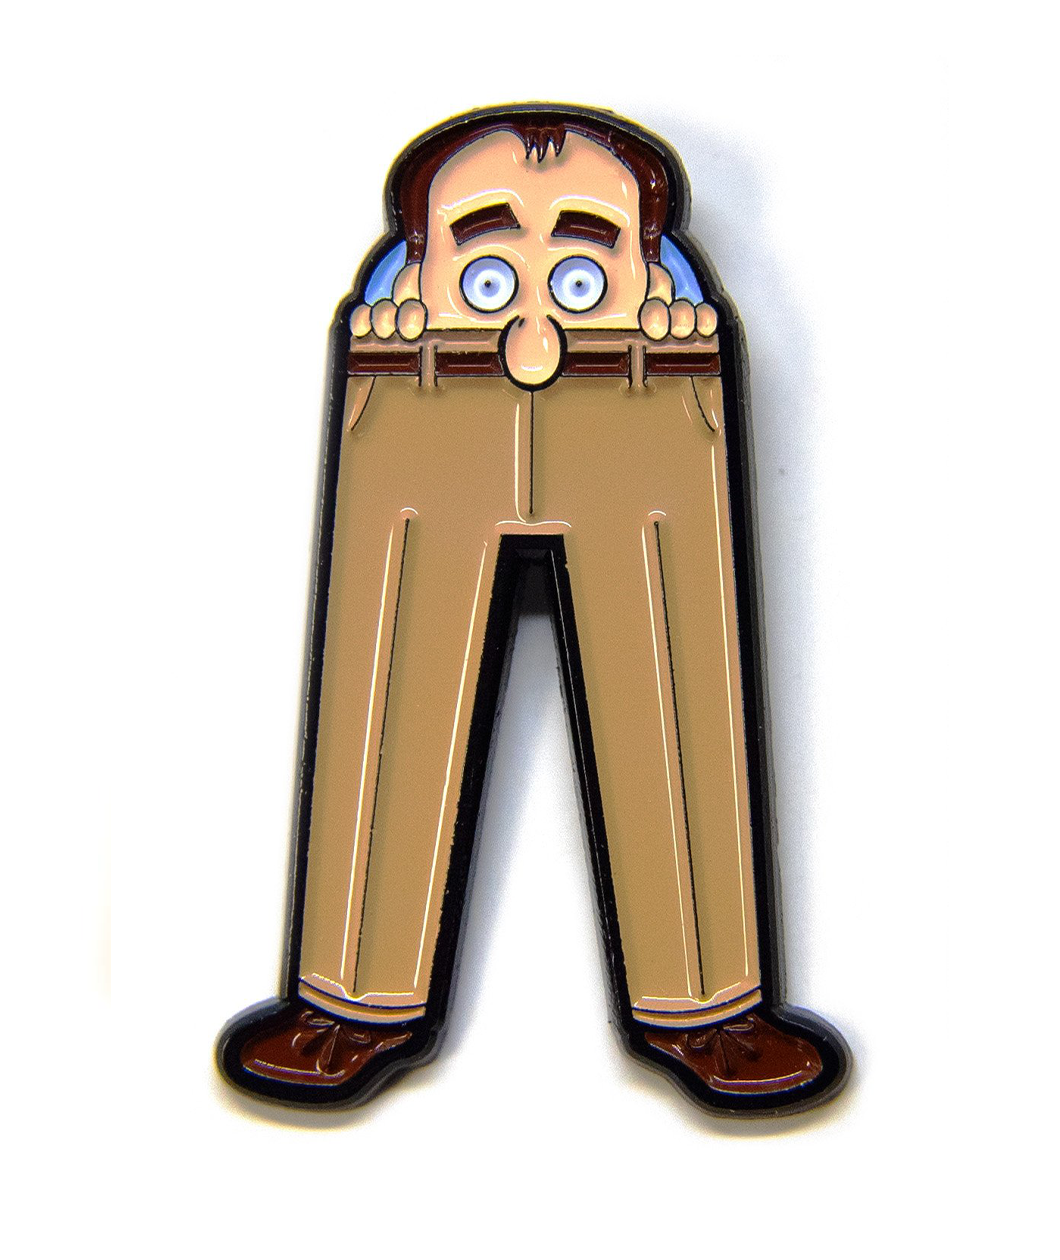 Ron Stampler's head peering out of a pair of khaki dress pants in pin form.